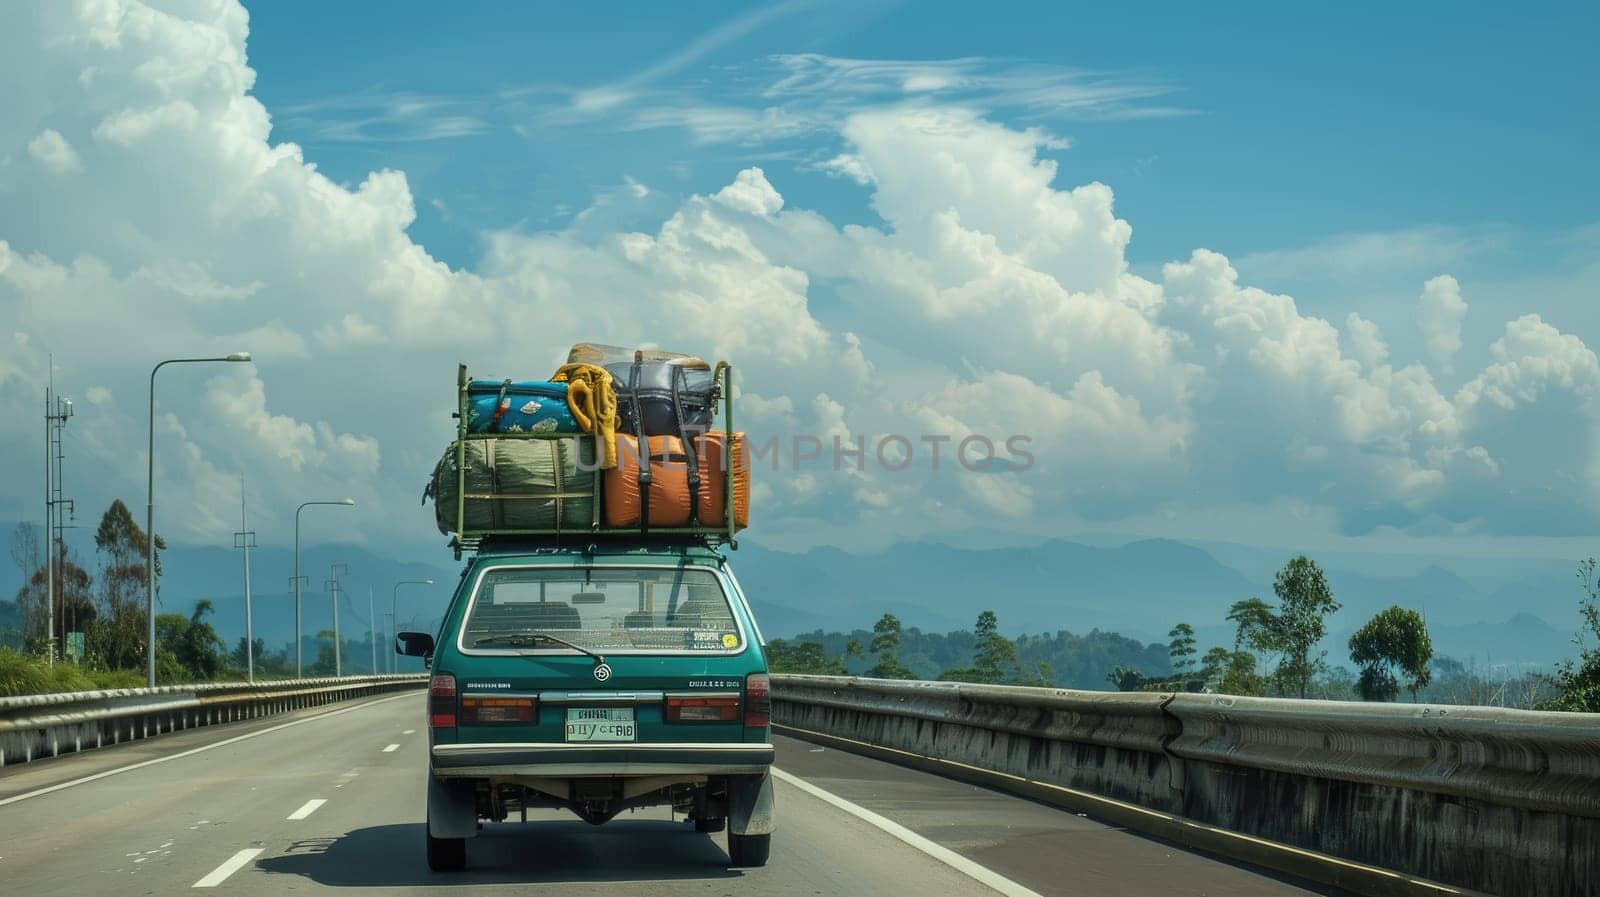 A car with luggage strapped on top with rural road landscape.